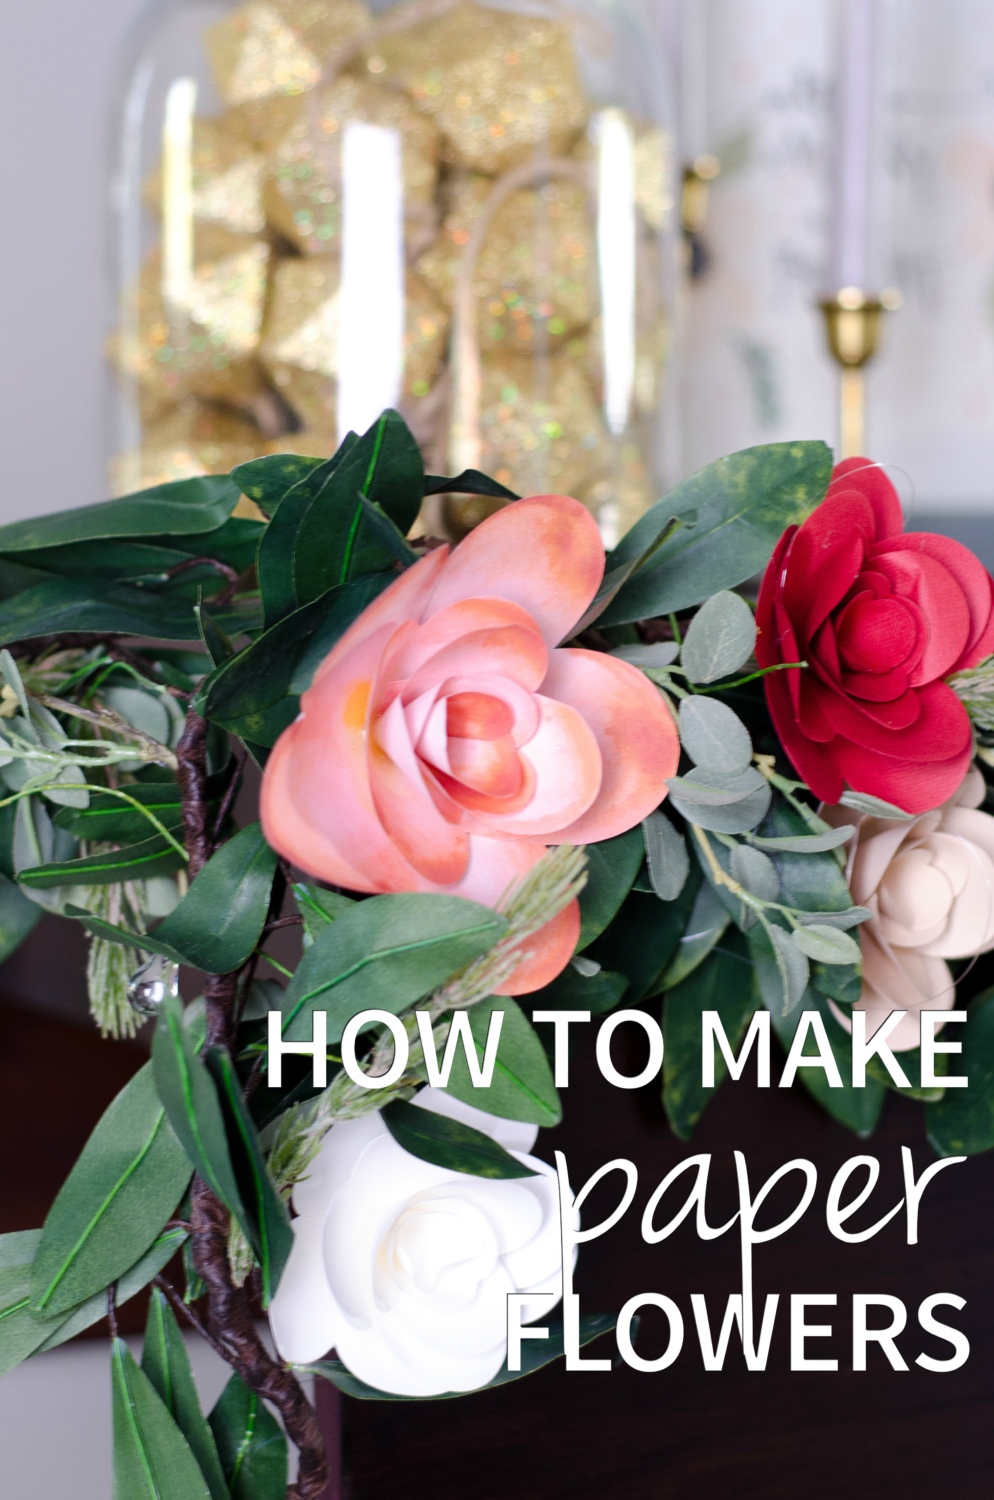 How to make paper flowers including a FREE printable template!